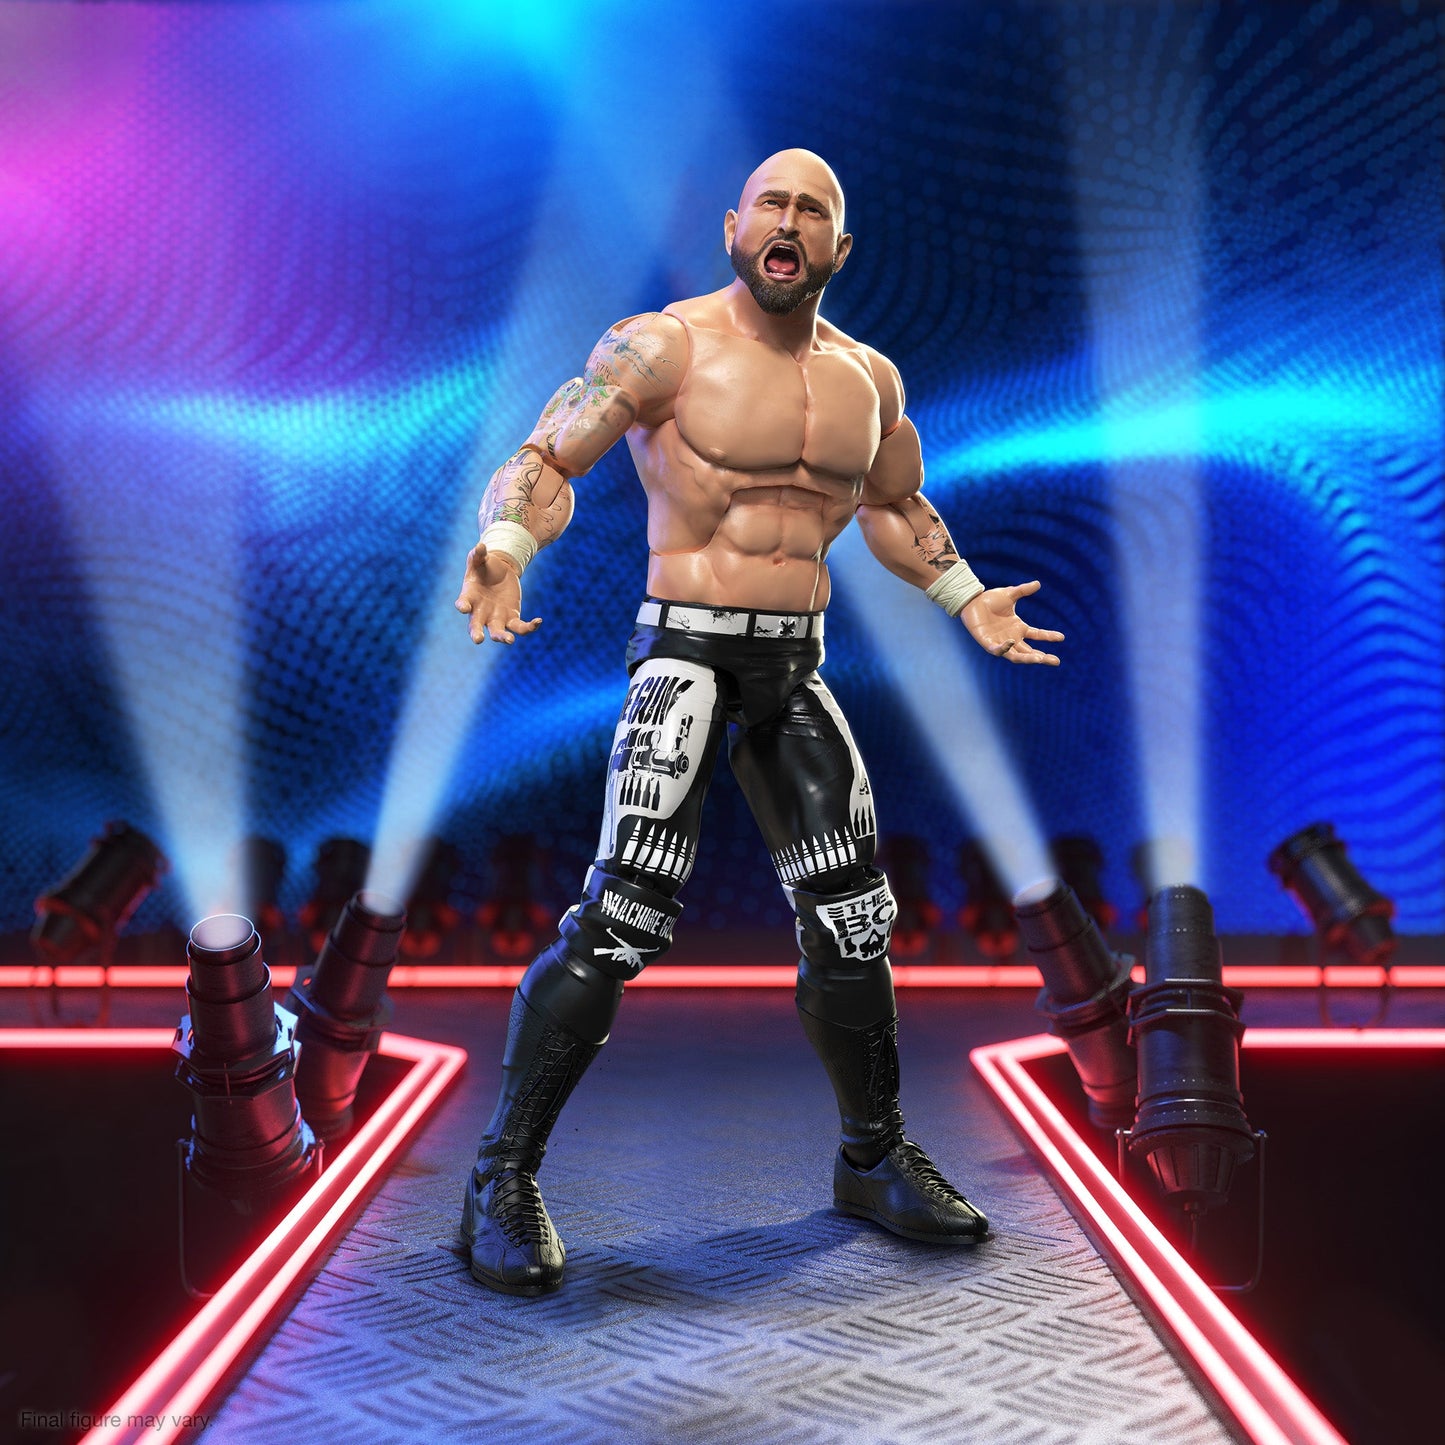 Unreleased Super7 Ultimates The Good Brothers Series 2 Karl Anderson